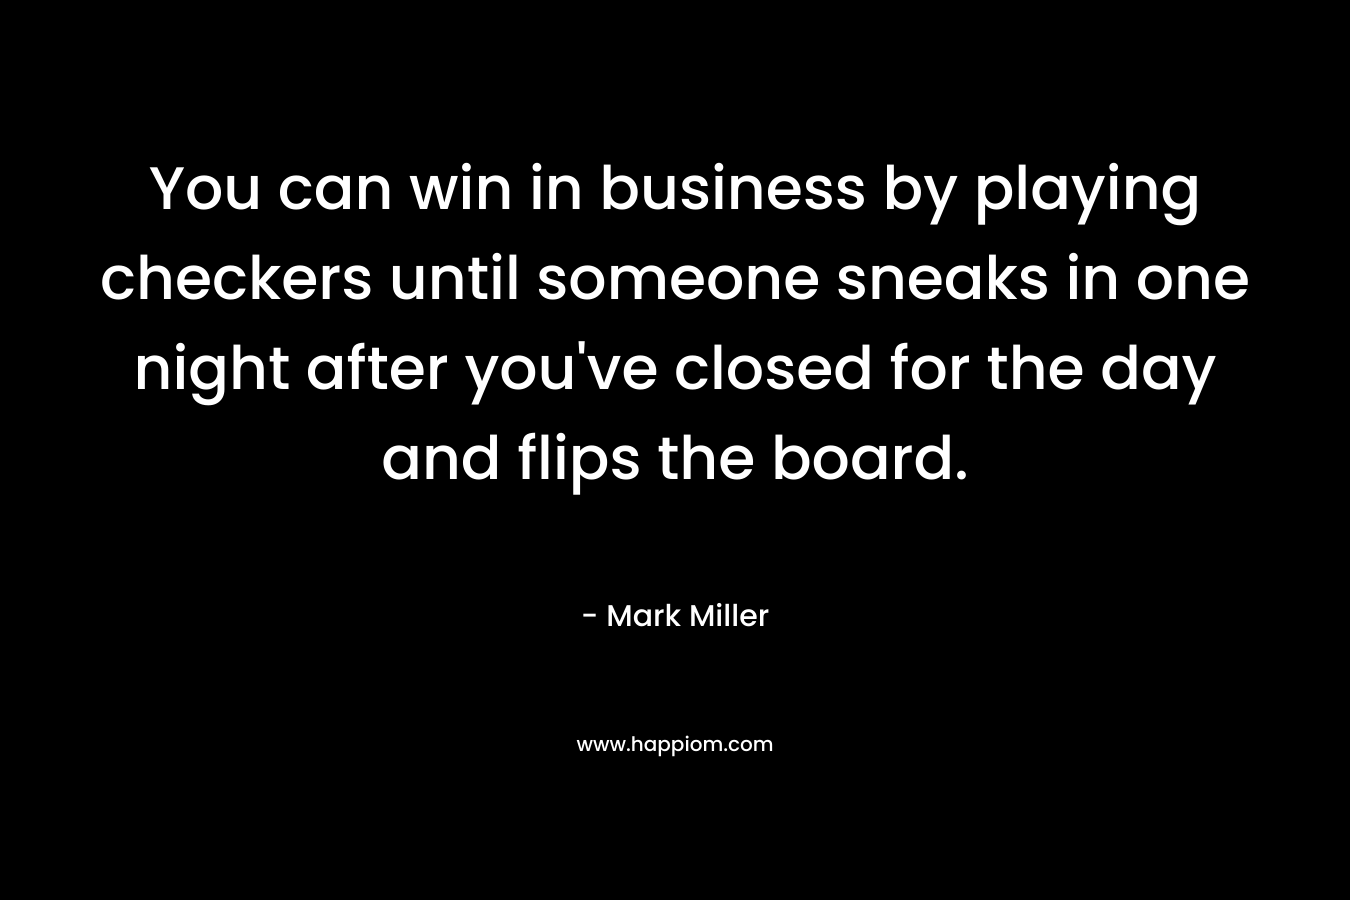 You can win in business by playing checkers until someone sneaks in one night after you’ve closed for the day and flips the board. – Mark      Miller